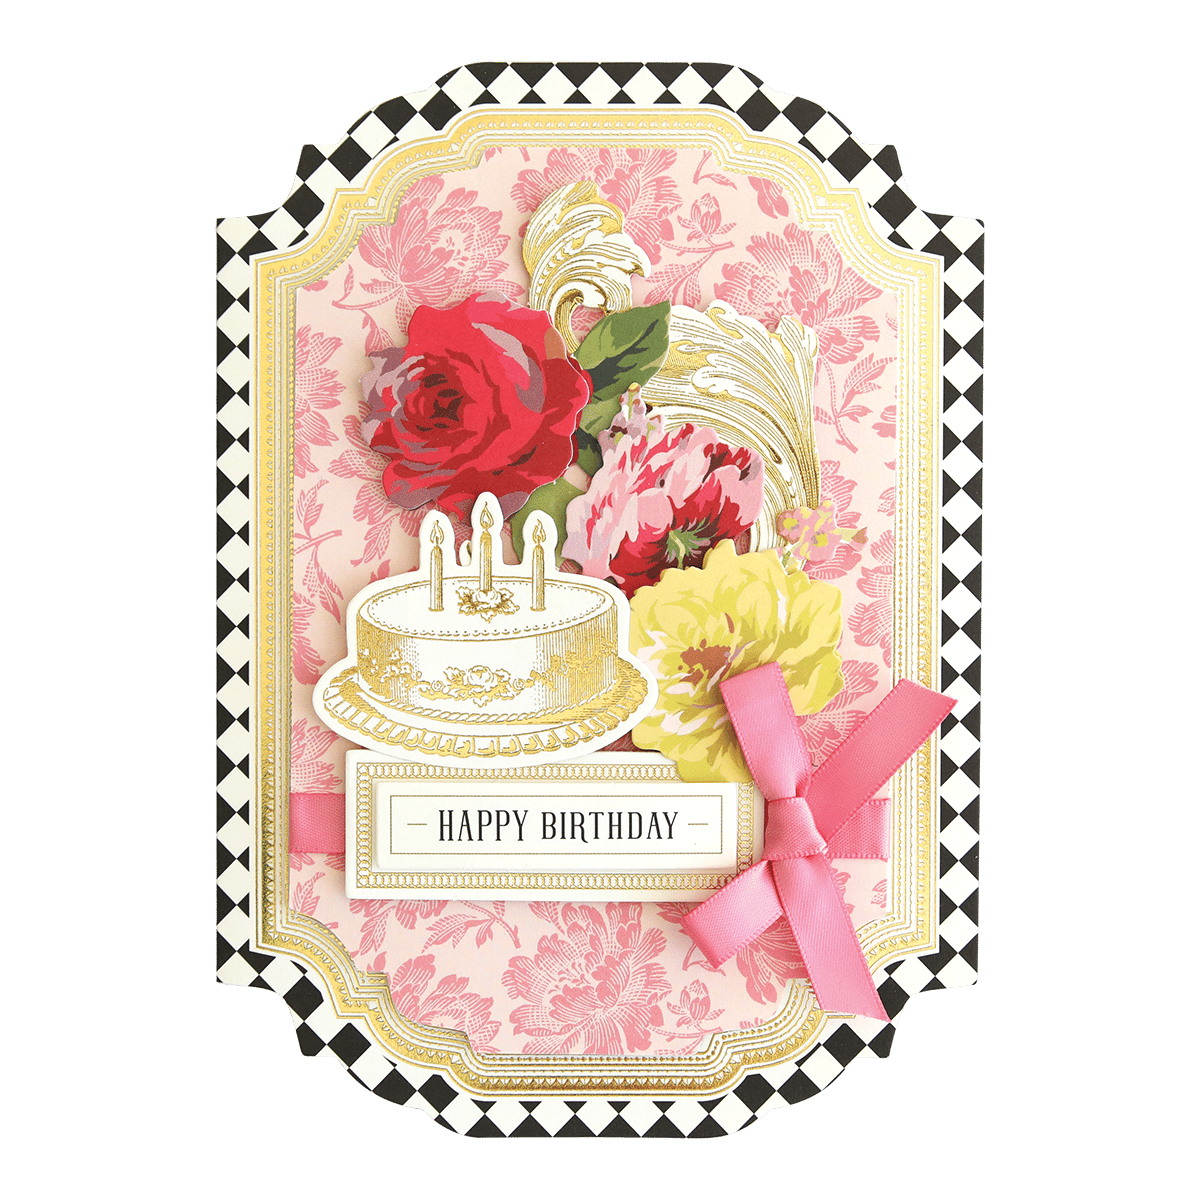  Anna Griffin Rocking Birthday Greeting Card Making Kit -  Complete Birthday Craft Gift Box - Cards, Layers, Stickers, Embellishments,  Envelopes, & More - DIY Card Making Supplies - Makes 20 Cards 